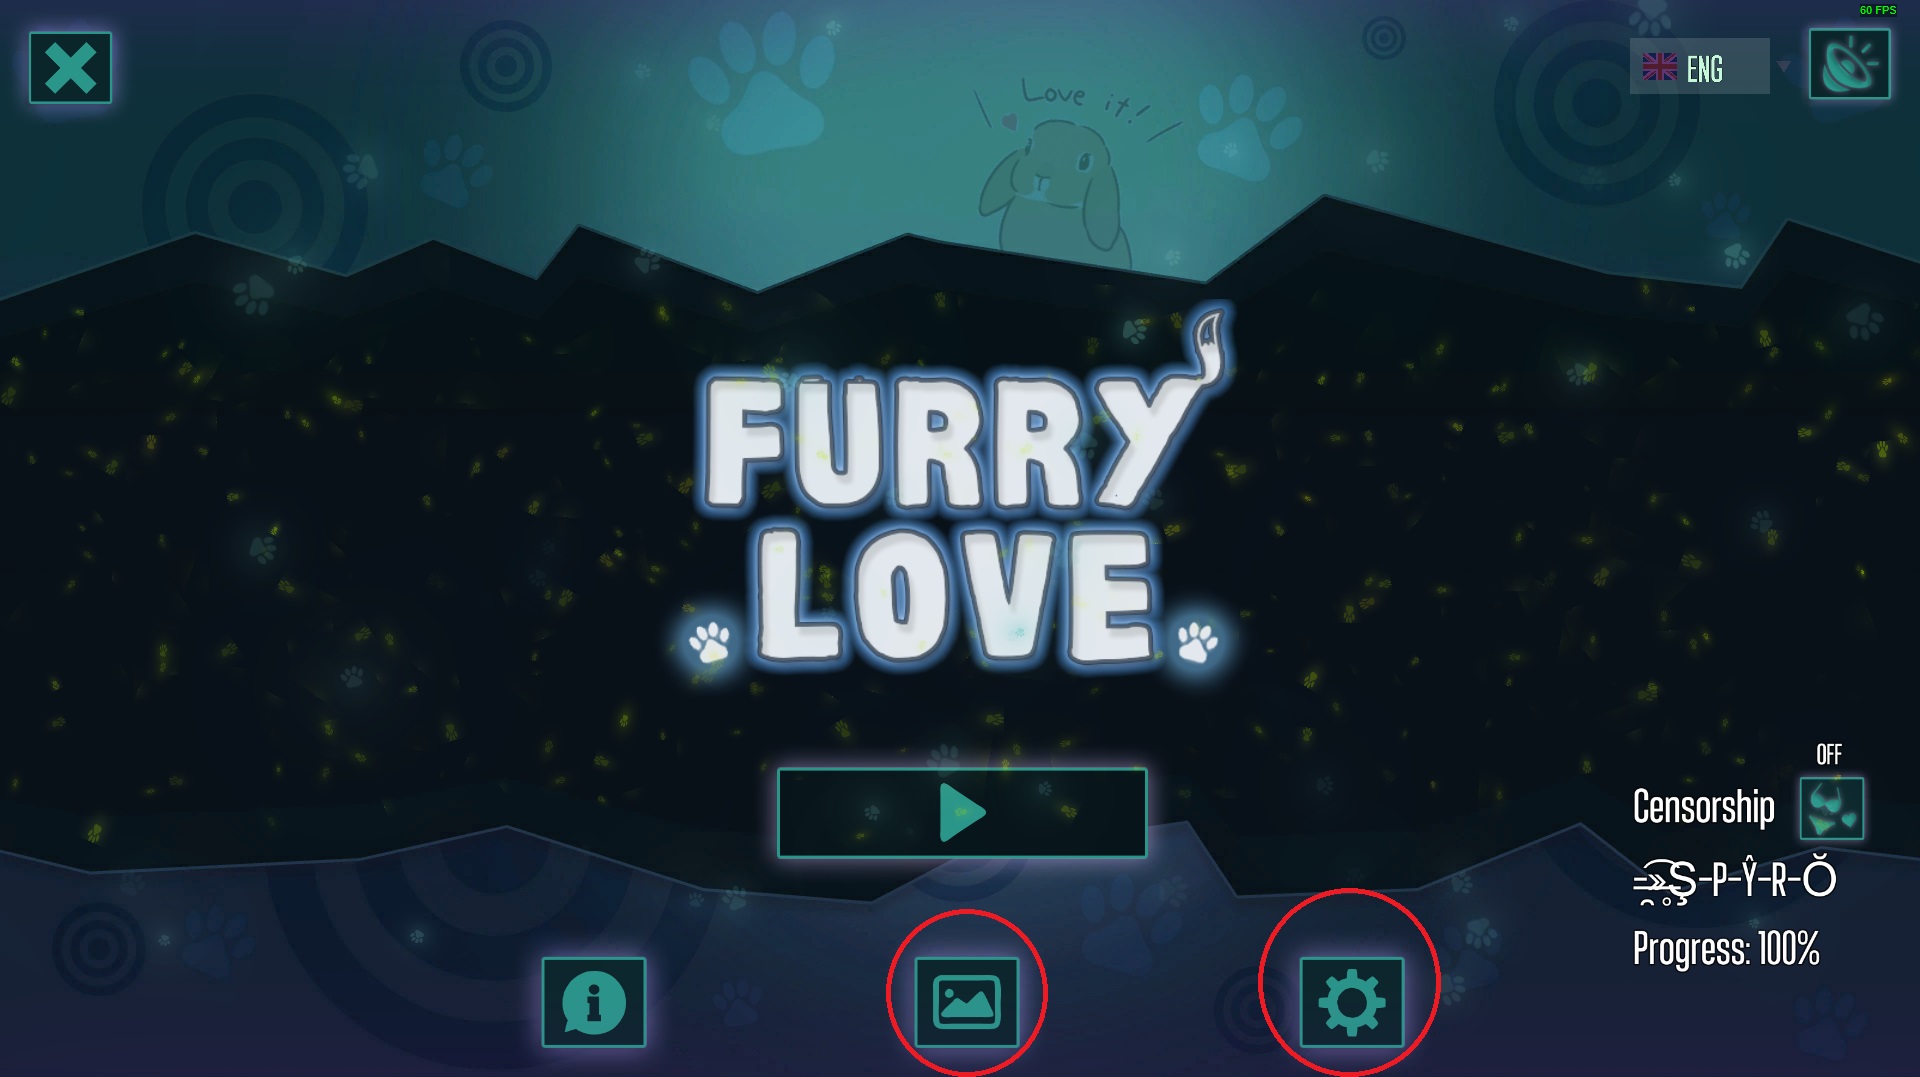 Furry Love How to get Gallery and Settings Achievements (Widescreen Users)